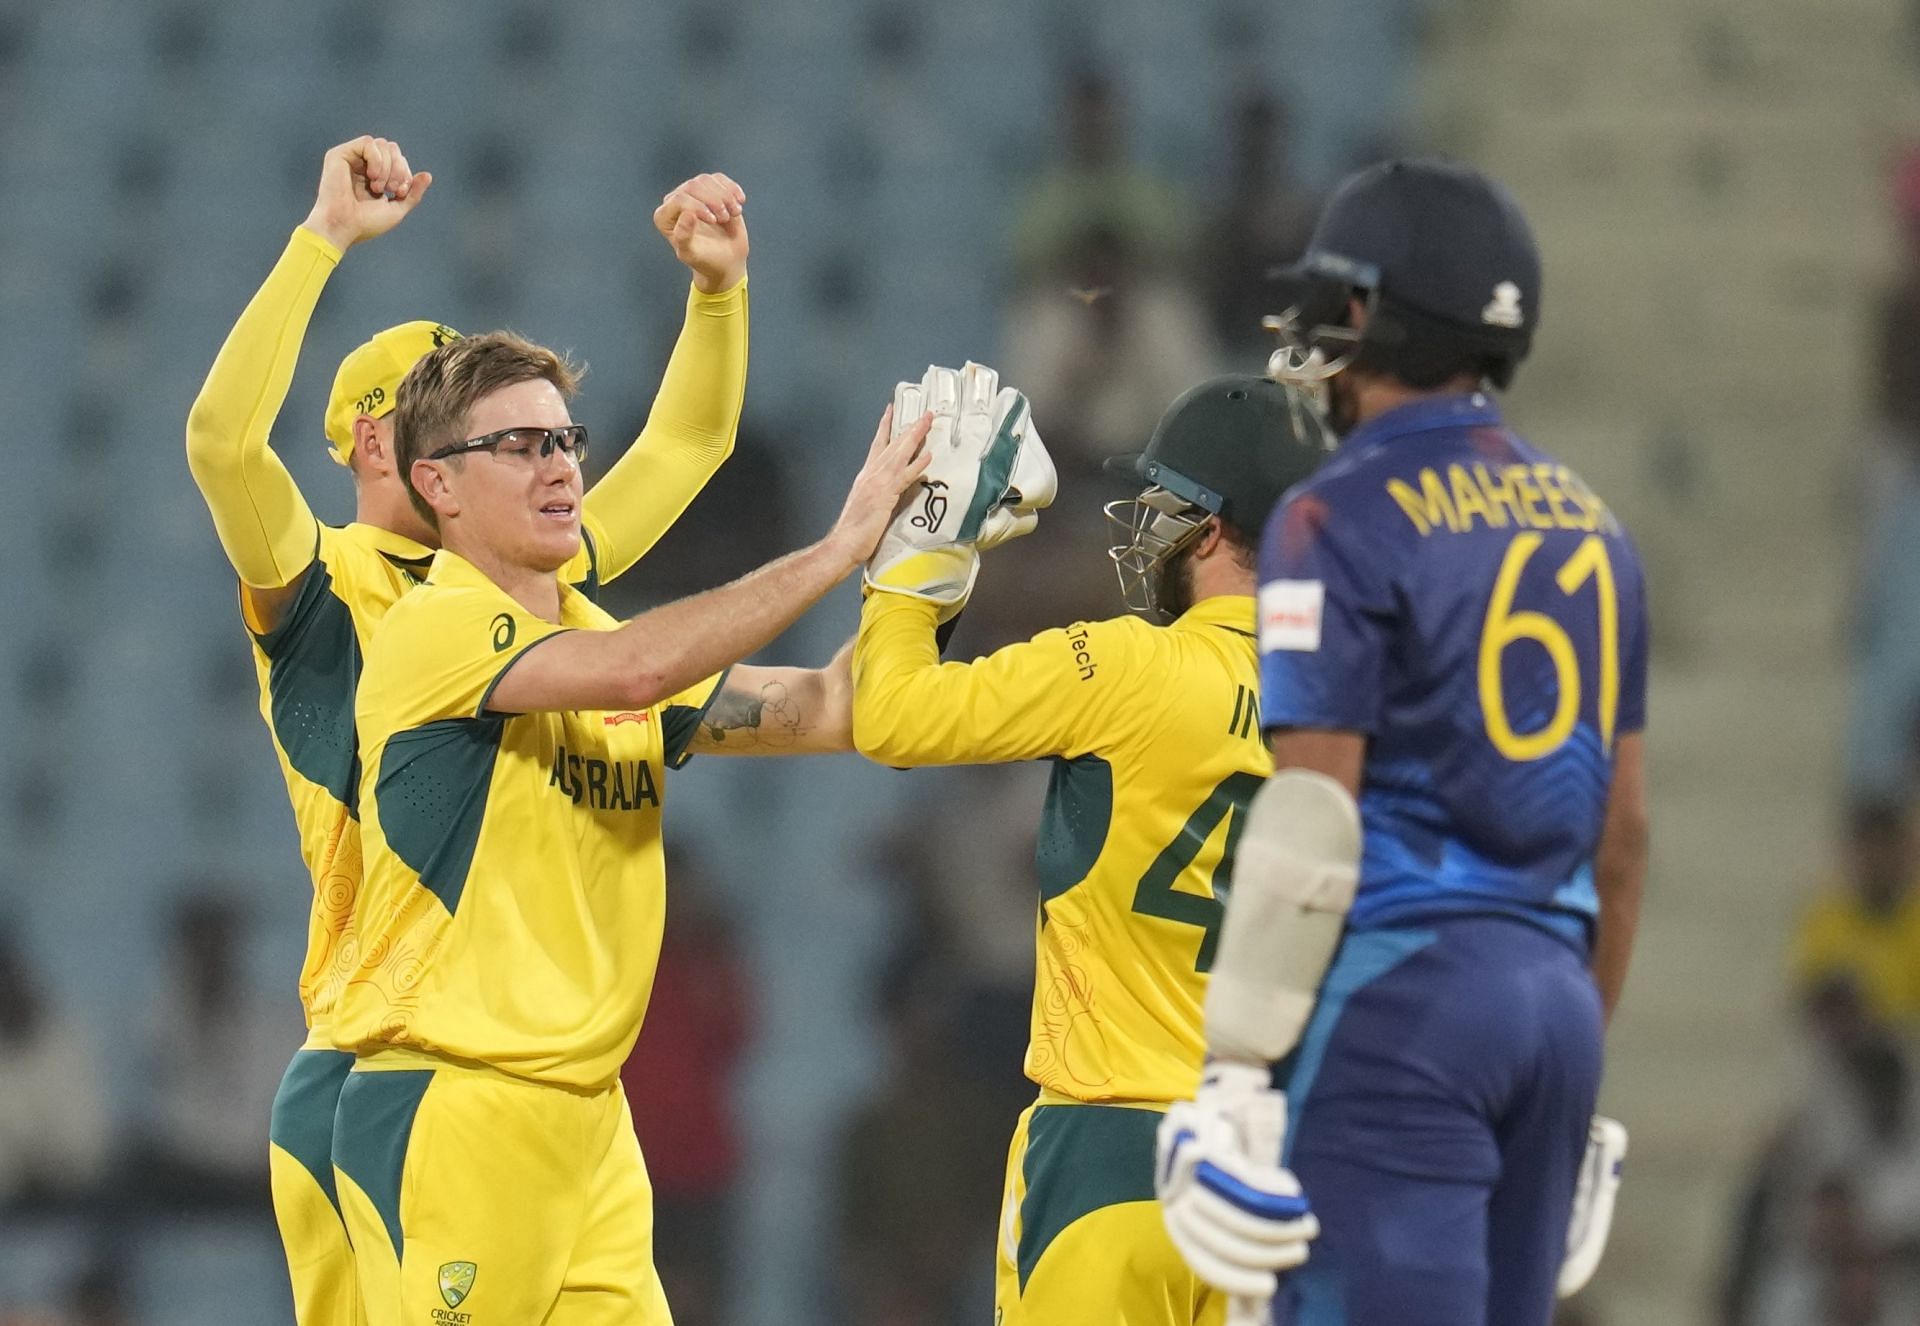 Wrist spinners can be match-winners in ODIs